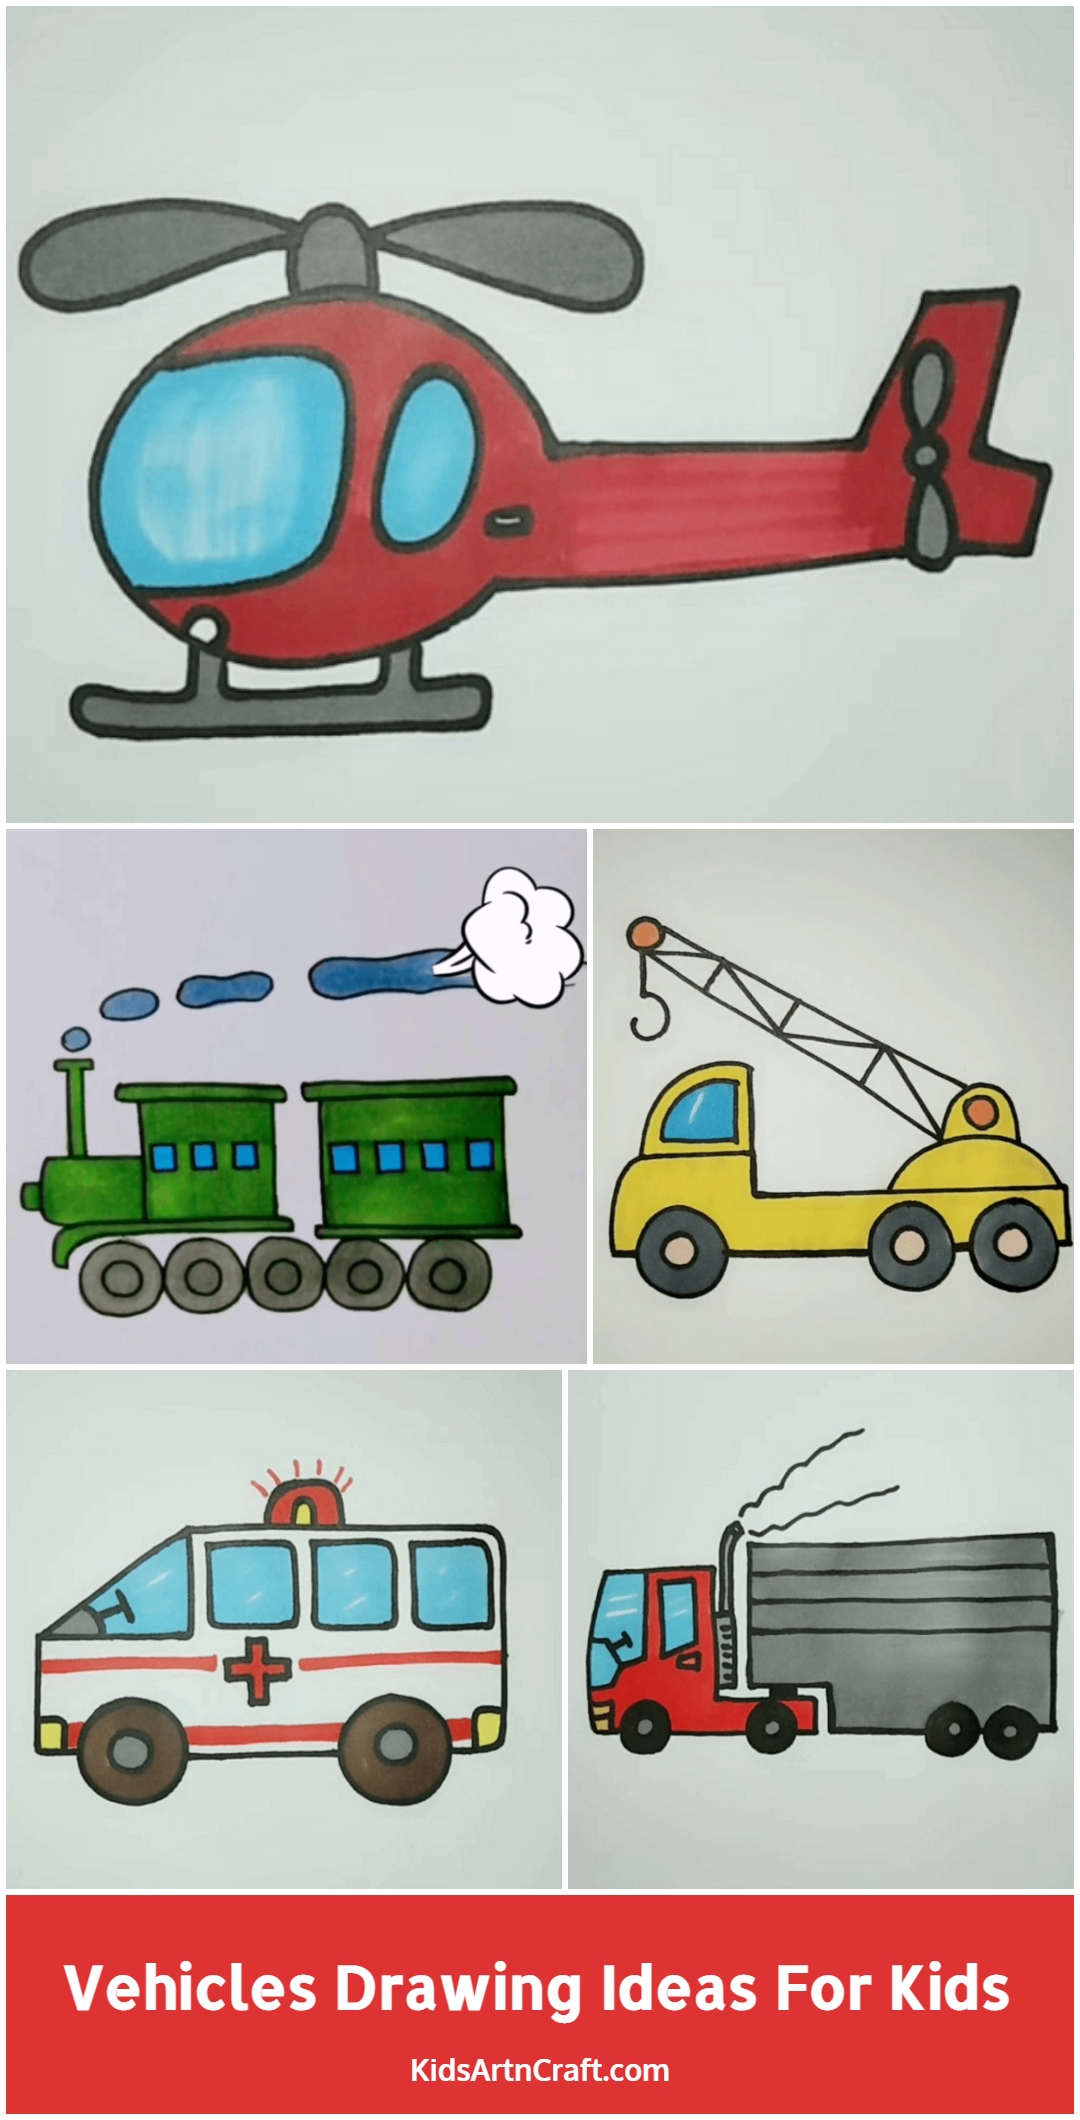 Vehicles Drawing Ideas For Kids